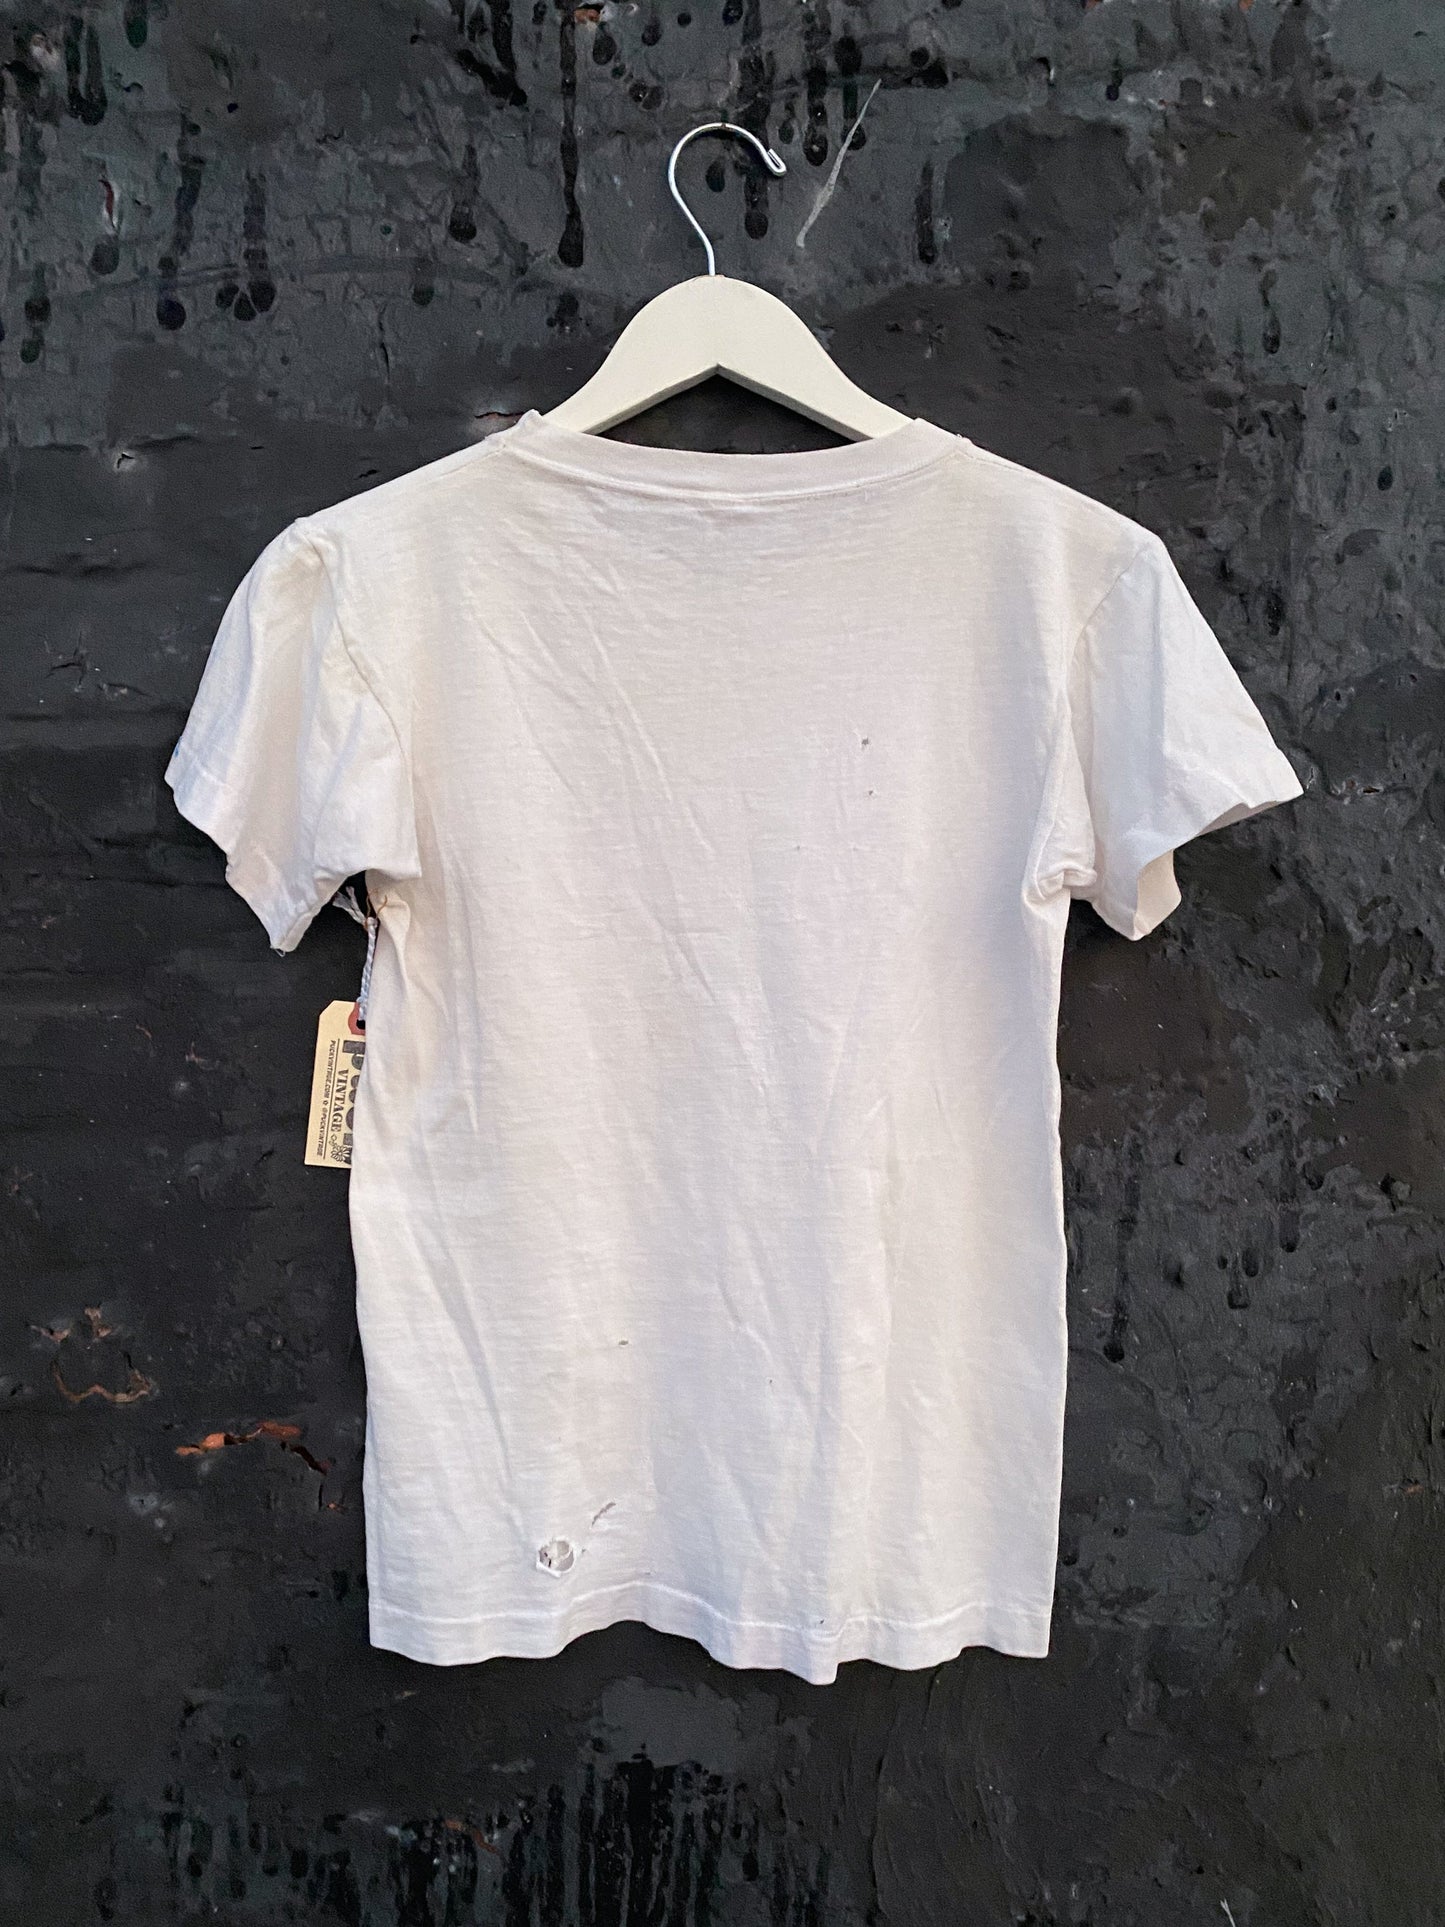 50's Champion White Busted Camp T Shirt